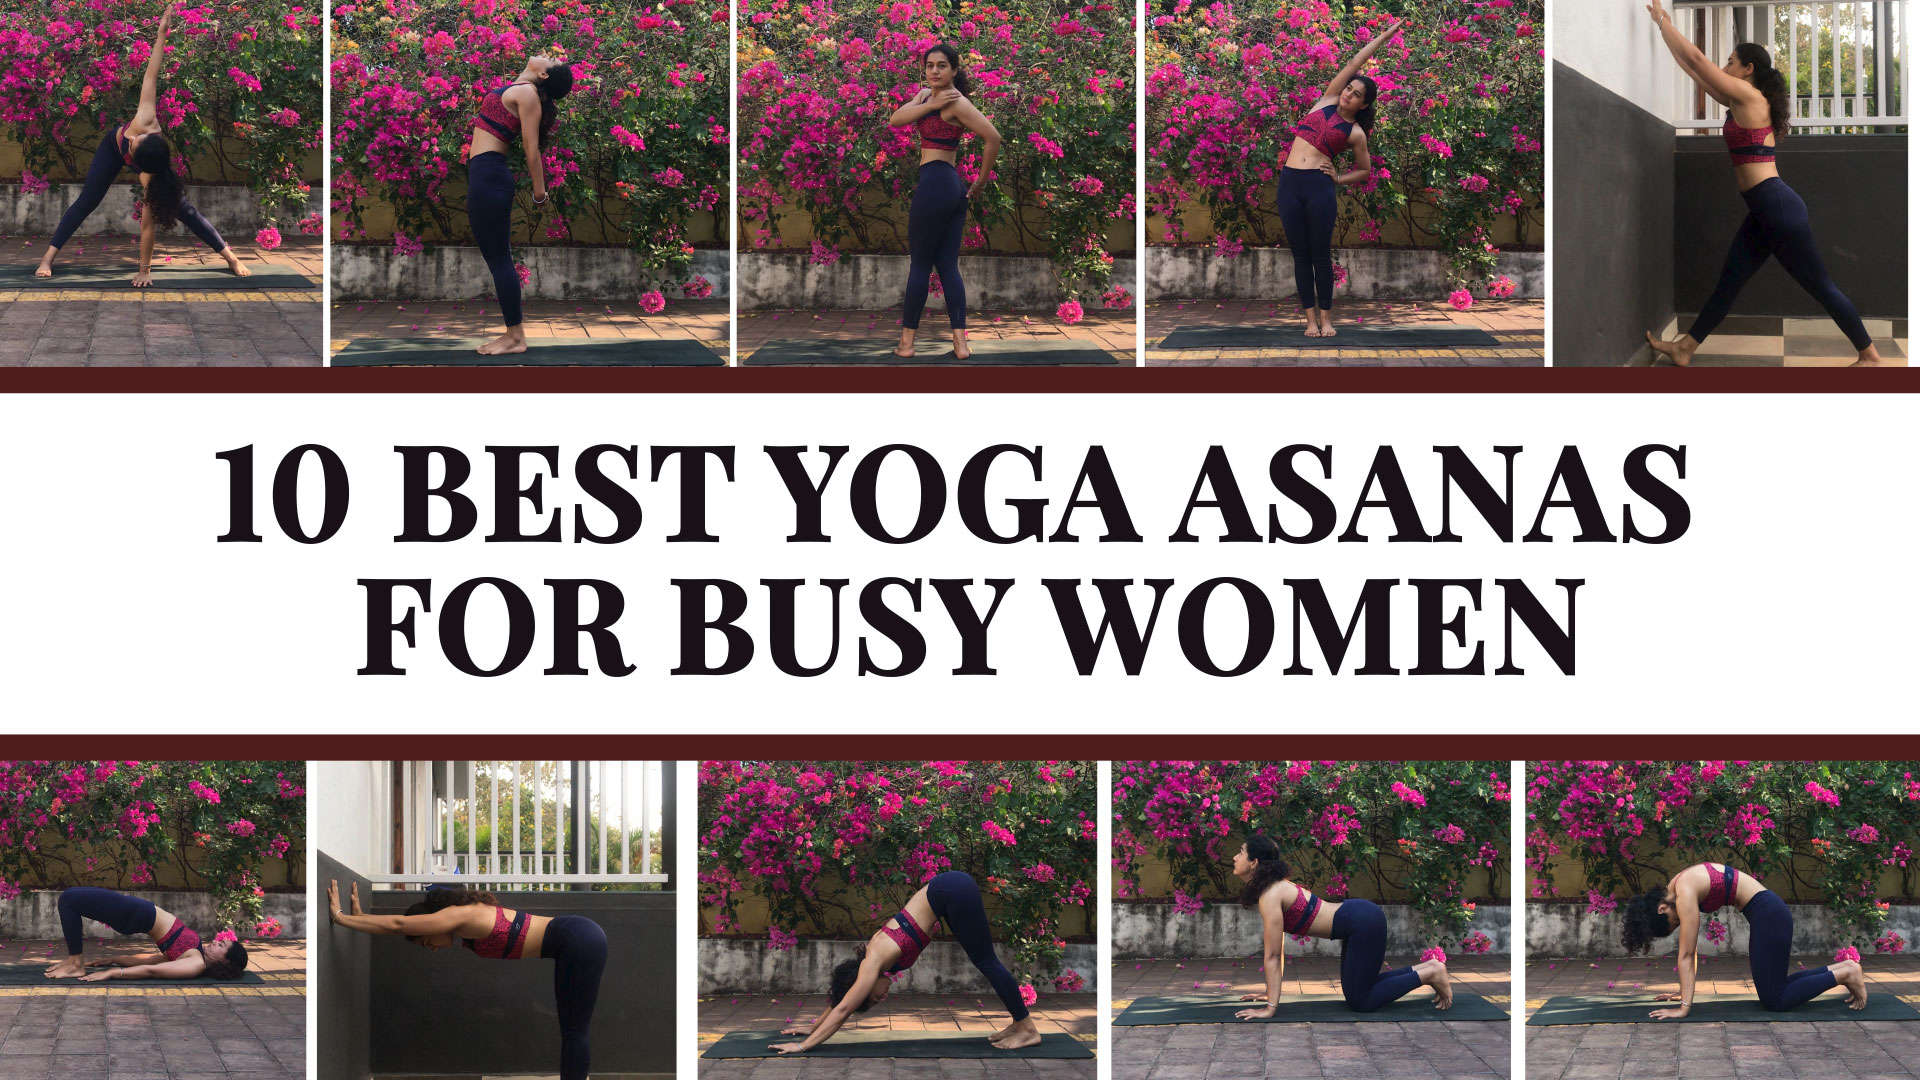 7 Best Yoga Poses You Should Do Daily for a Healthy Life